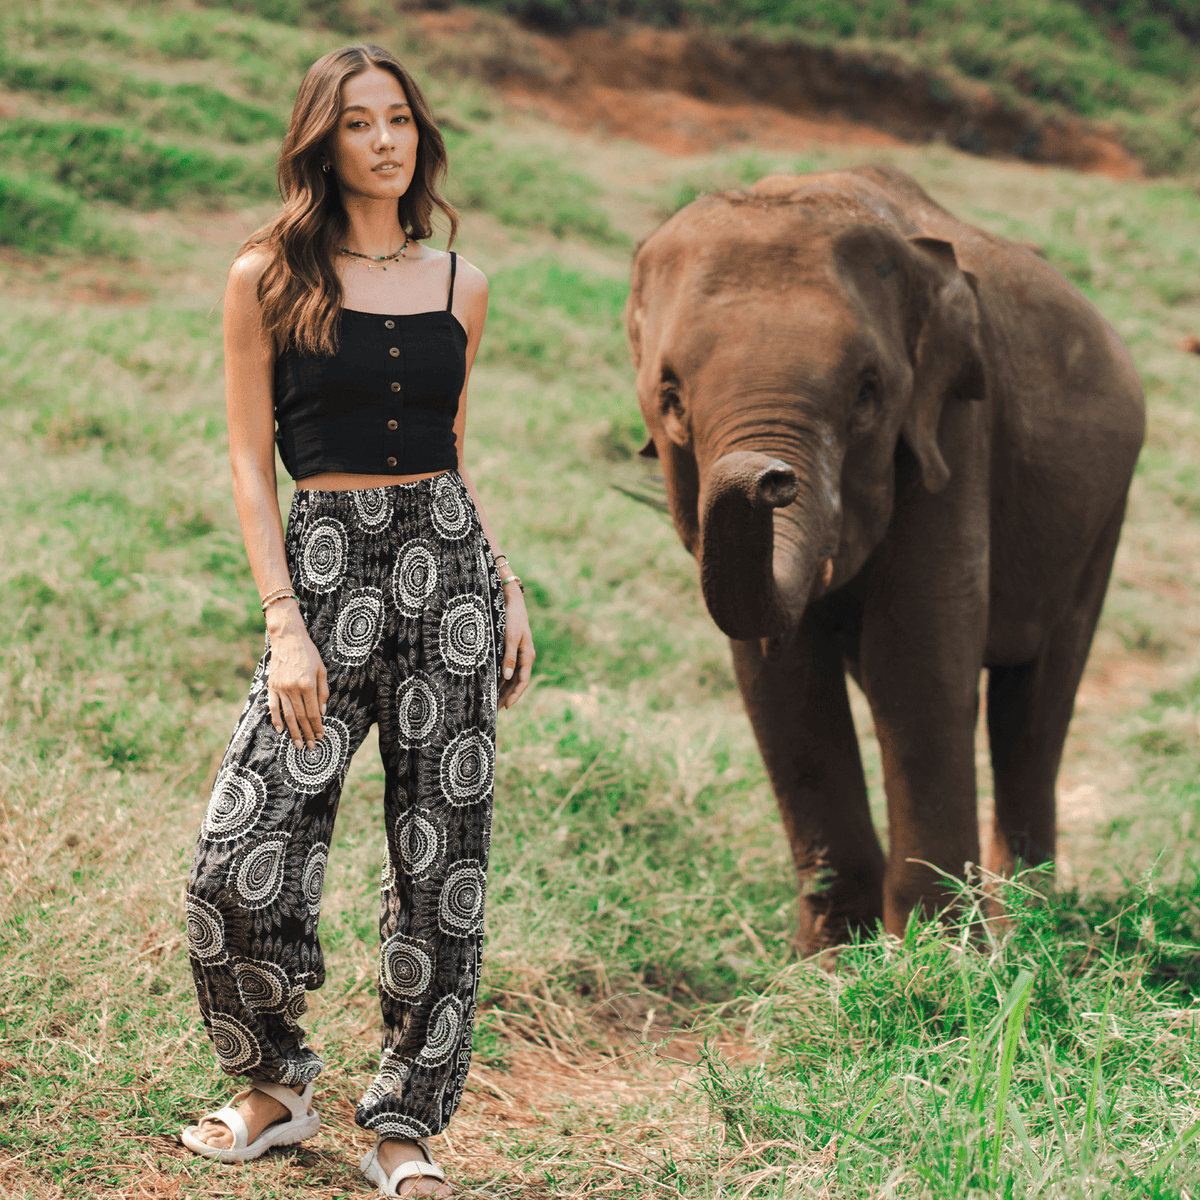 Model standing in front of an elephant wearing a black cotton tank top and black and white mandala print harem pants